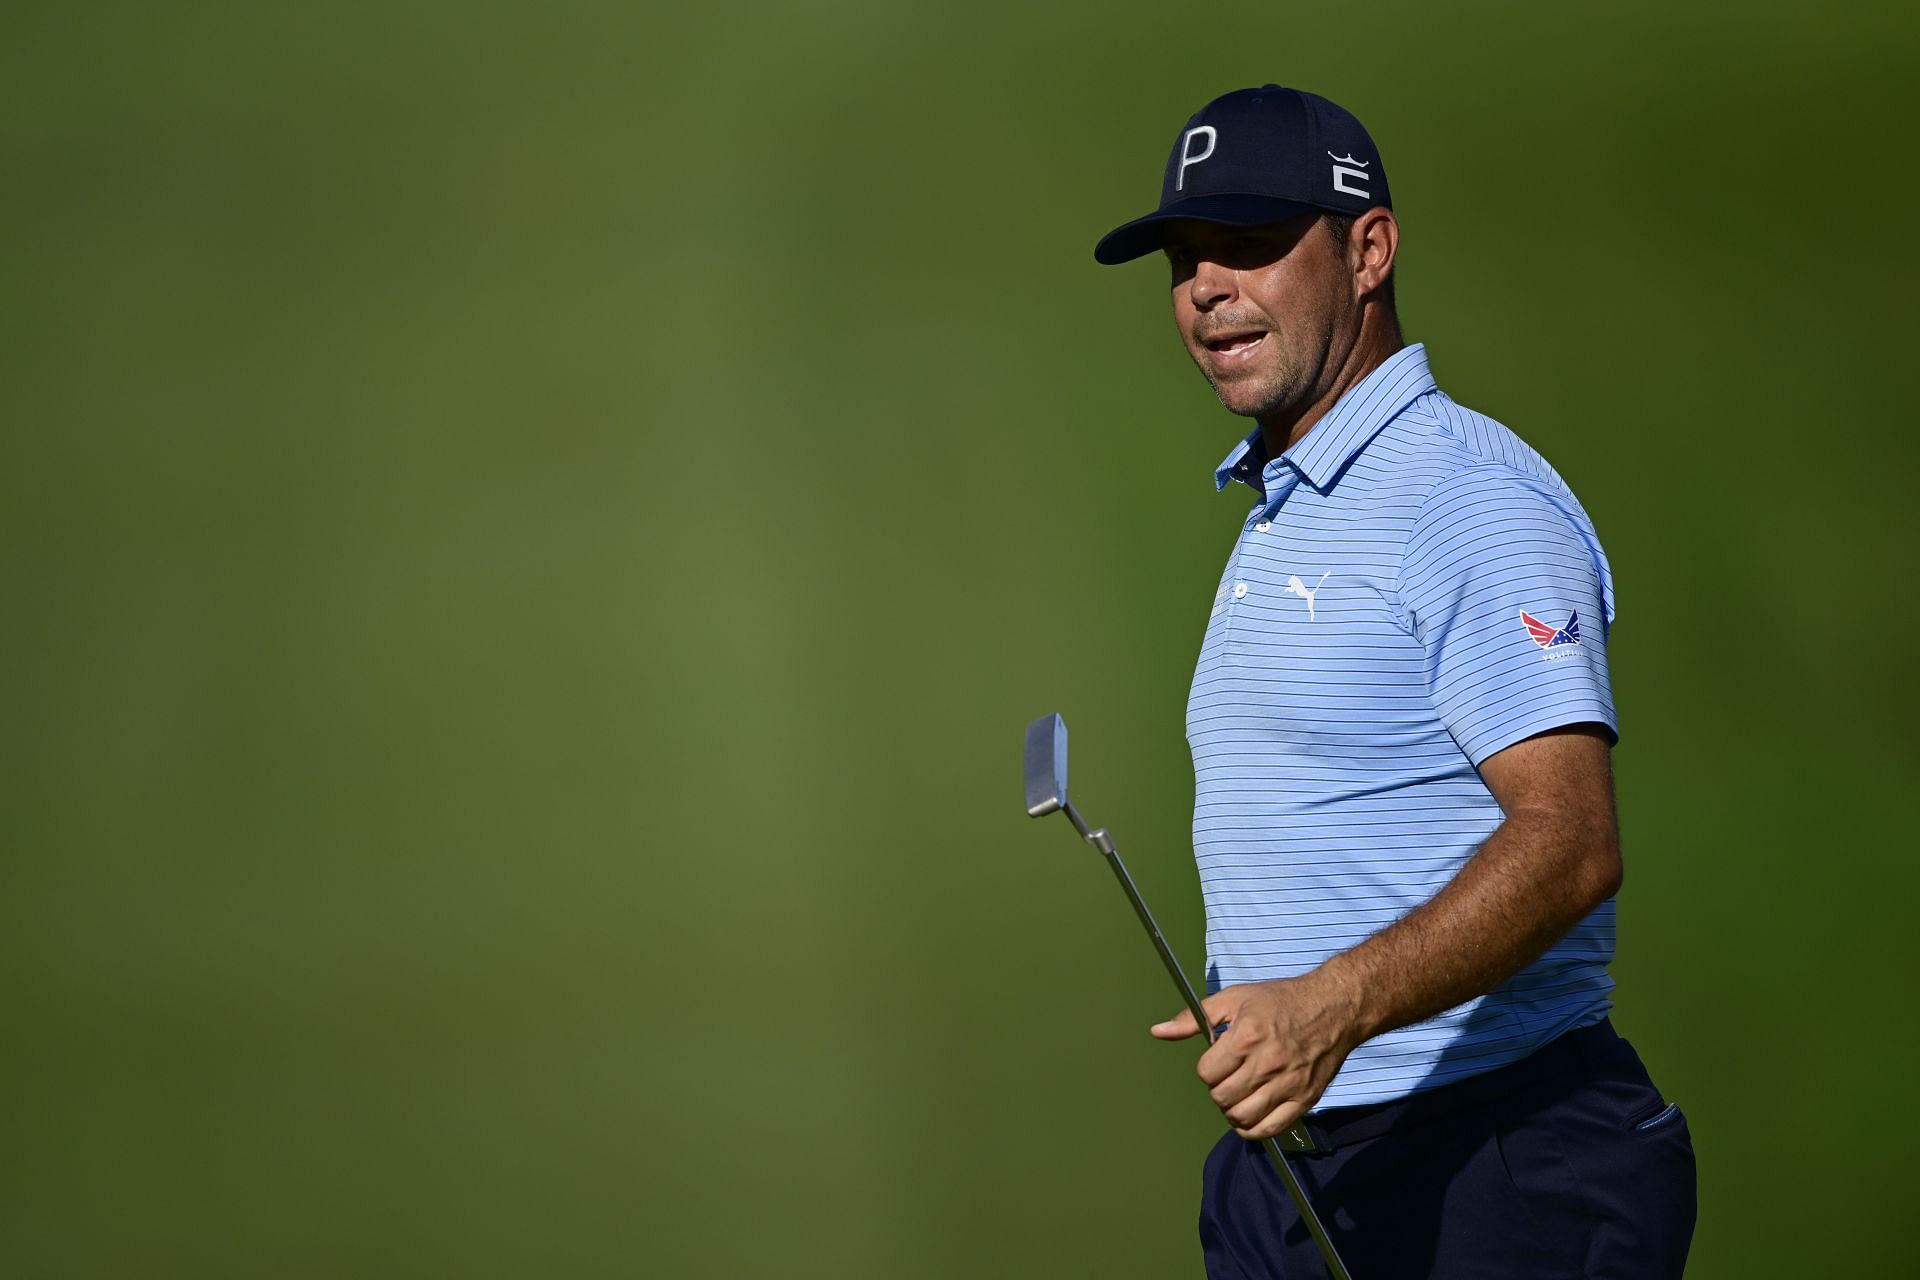 Gary Woodland walks on the 18th green during the second round of the 2023 Wyndham Championship